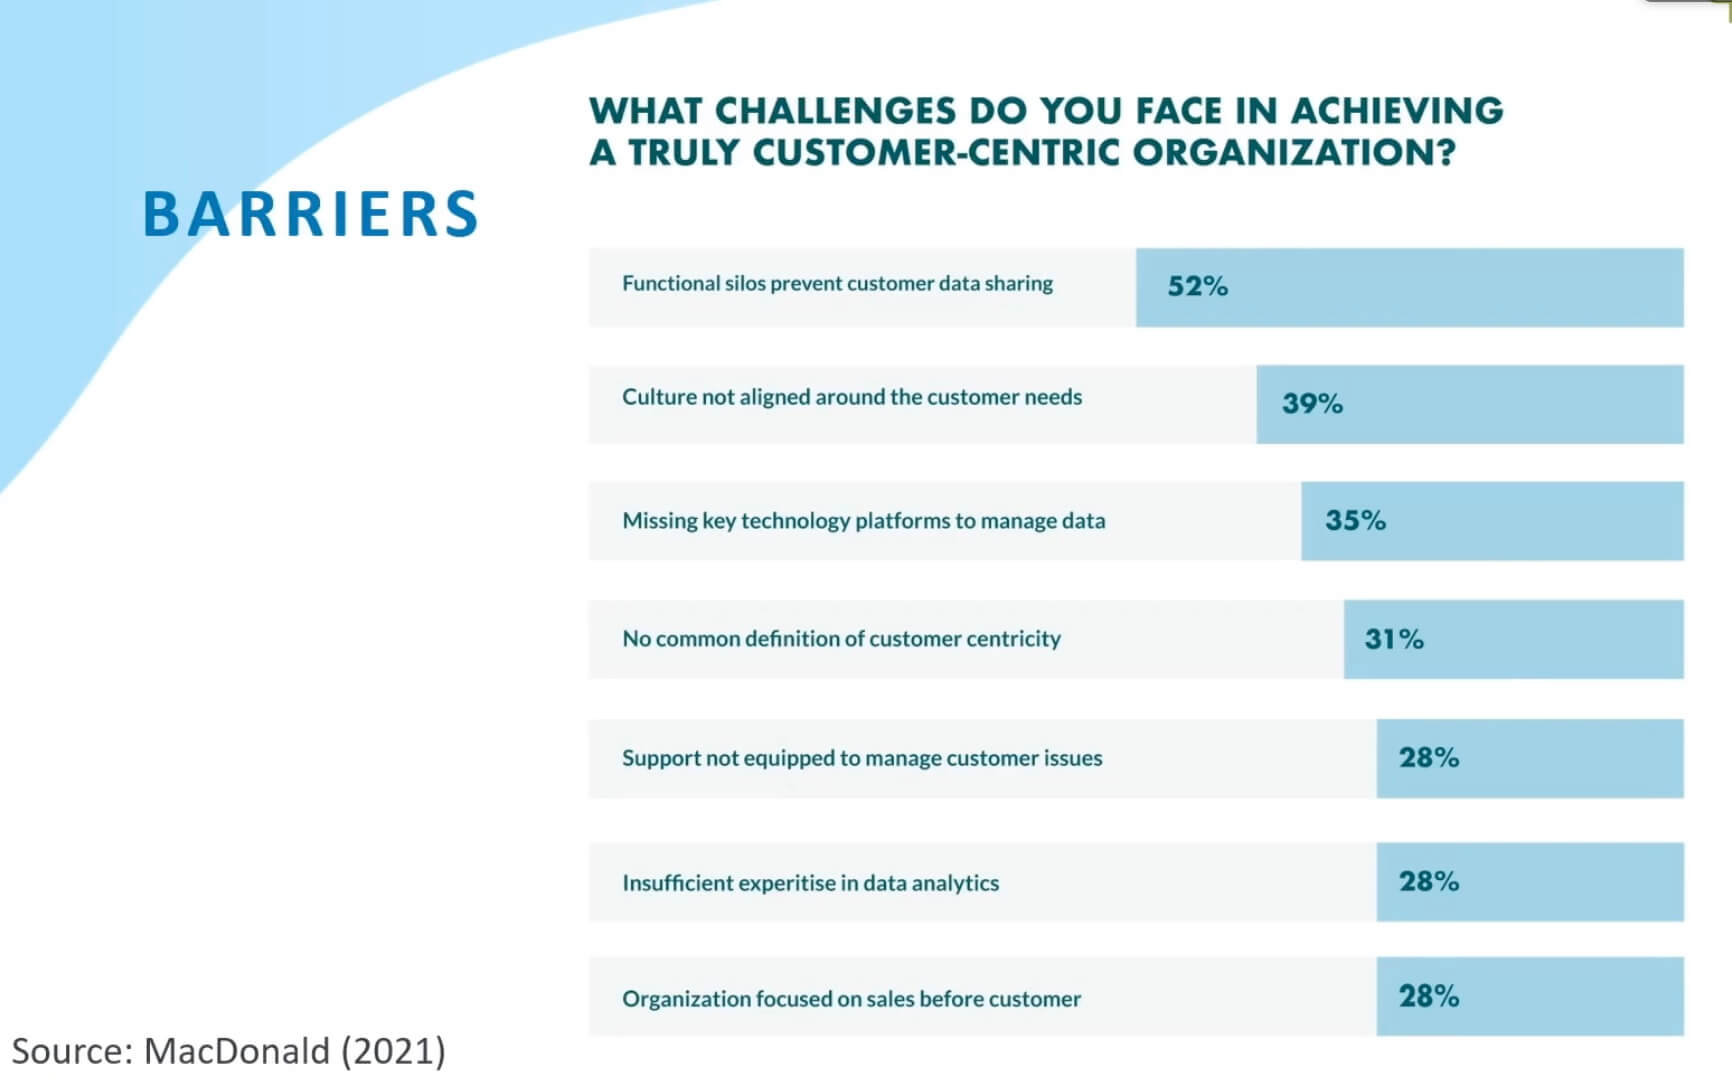 Barriers: What challenges do you face in achieving a truly customer-centric organization